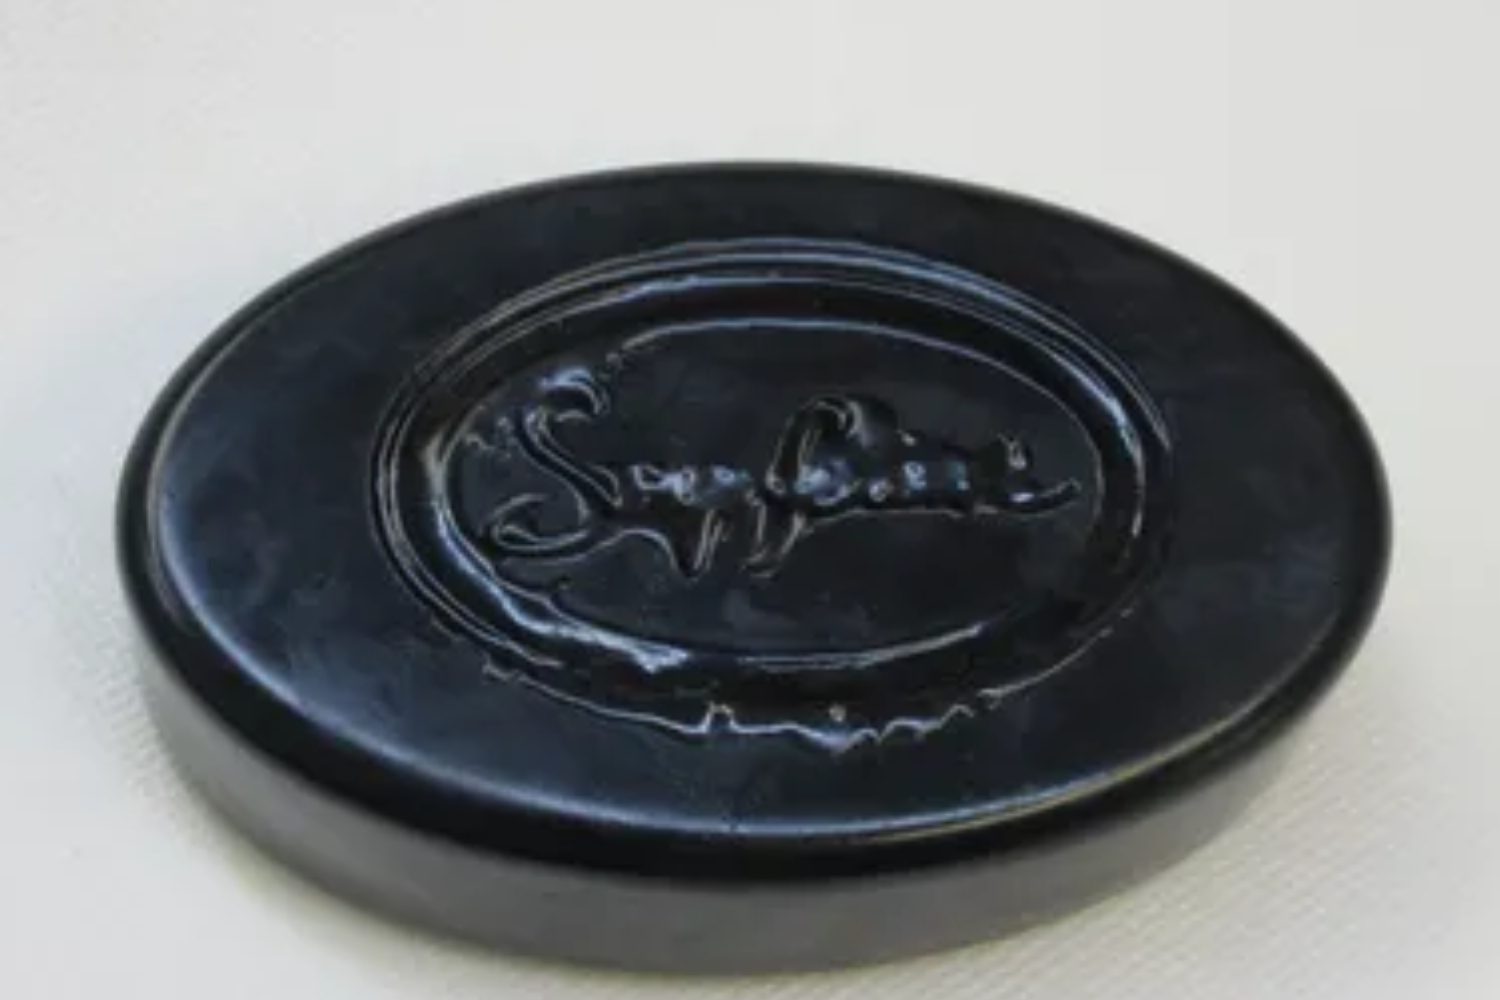 A black round soap dish with the word soapy on it.